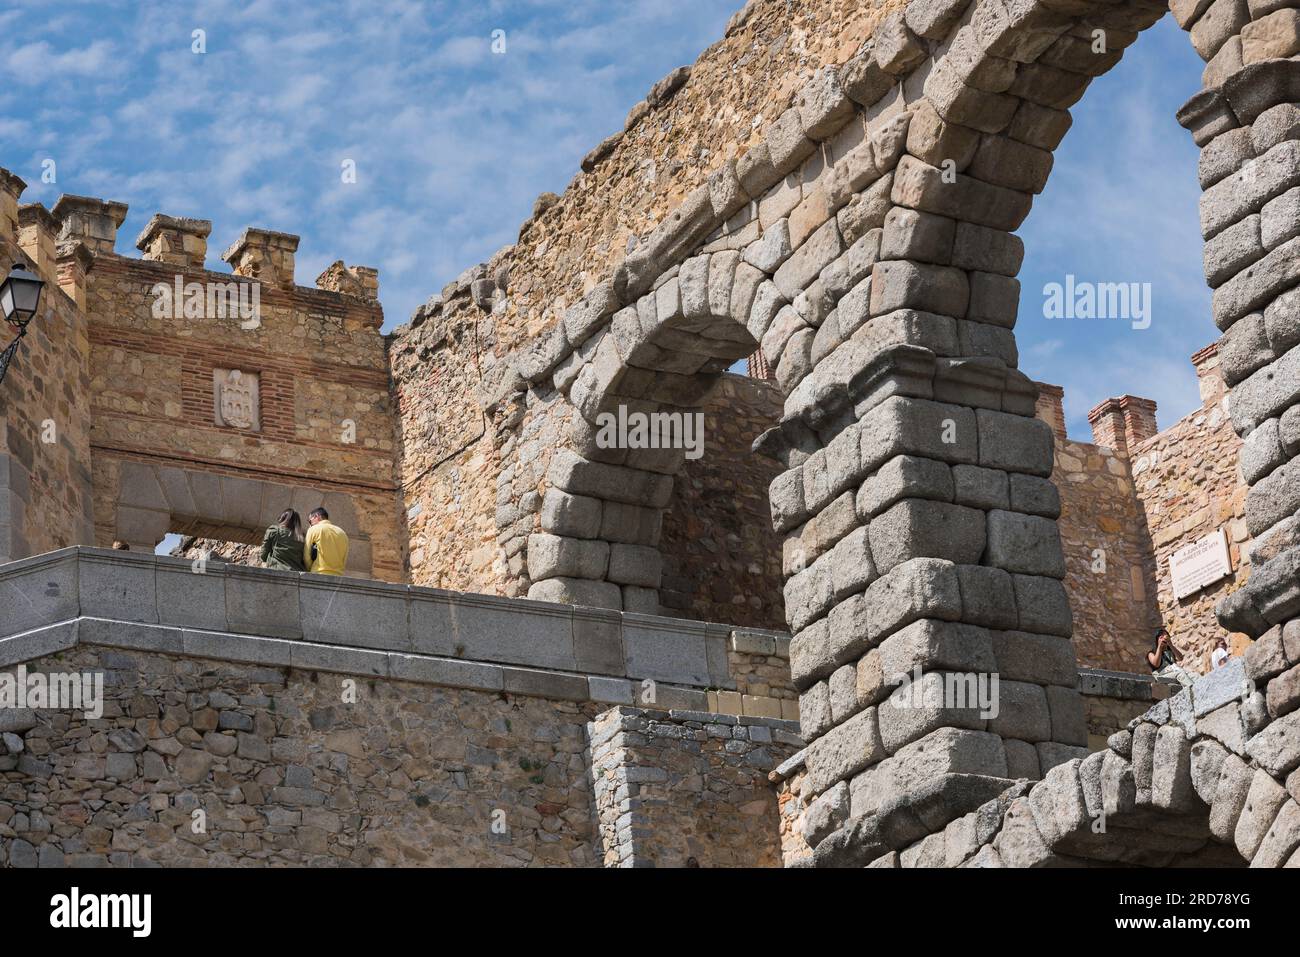 Spain tourism, rear view of a young couple in conversation beside the magnificent 1st Century Roman aqueduct in Segovia, Spain Stock Photo